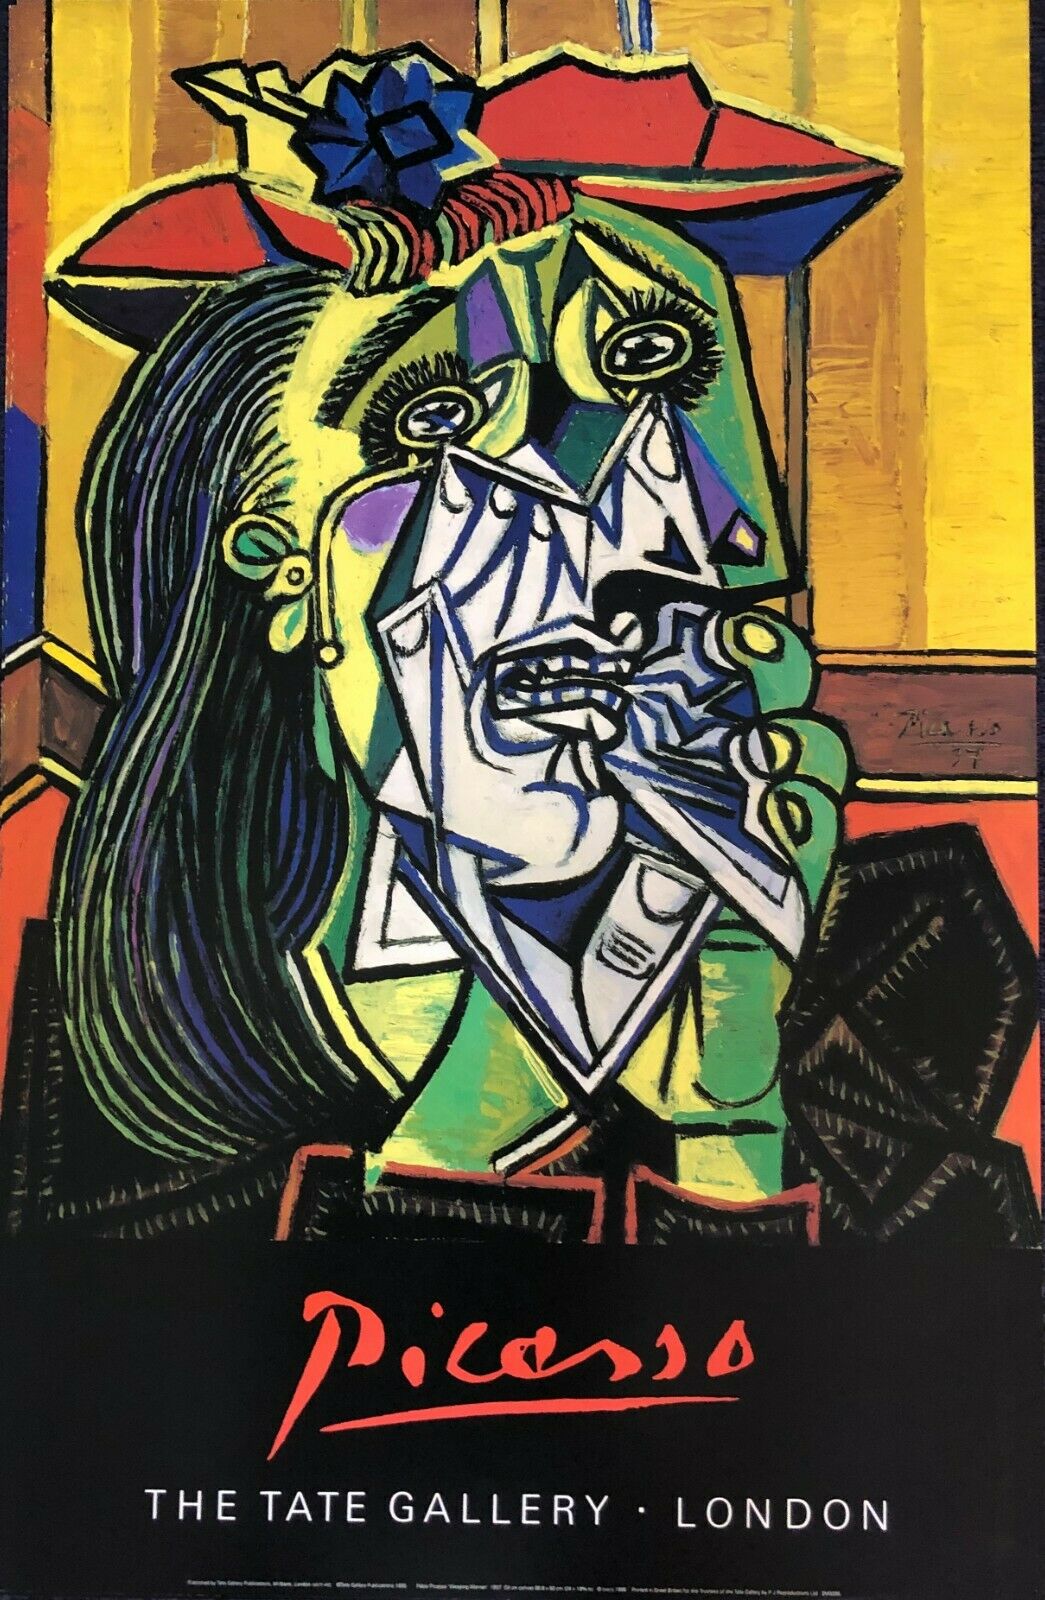 Weeping Woman by Pablo Picasso (Art Print, 51cm x 58.5cm)